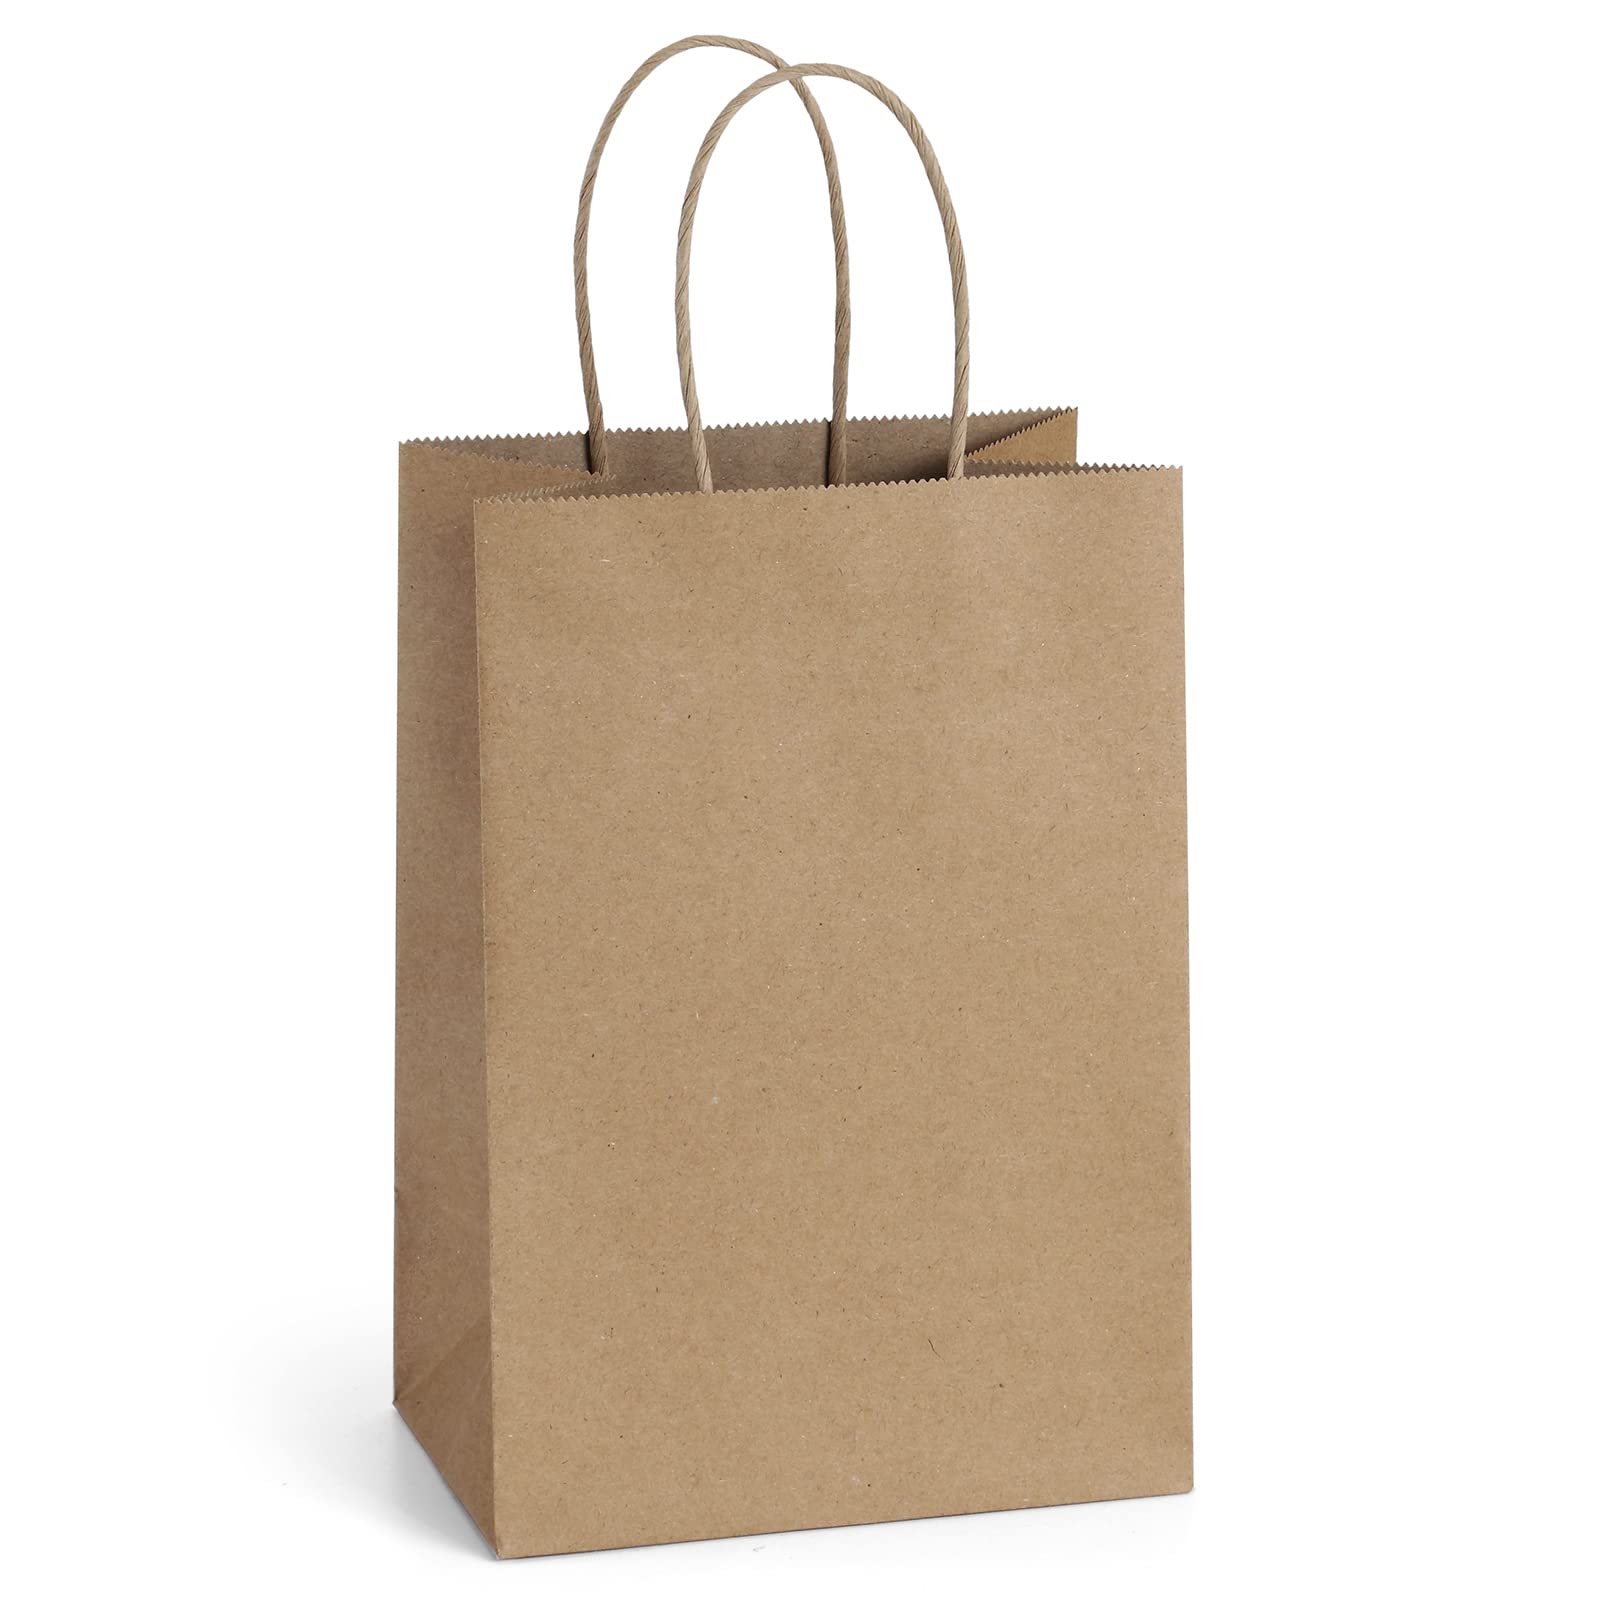 BagDream Kraft Paper Bags 100Pcs 5.25x3.75x8 Inches Small Paper Gift Bags with Handles Bulk, Paper Shopping Bags, Kraft Bags, Party Bags, Gift Bags (Brown)